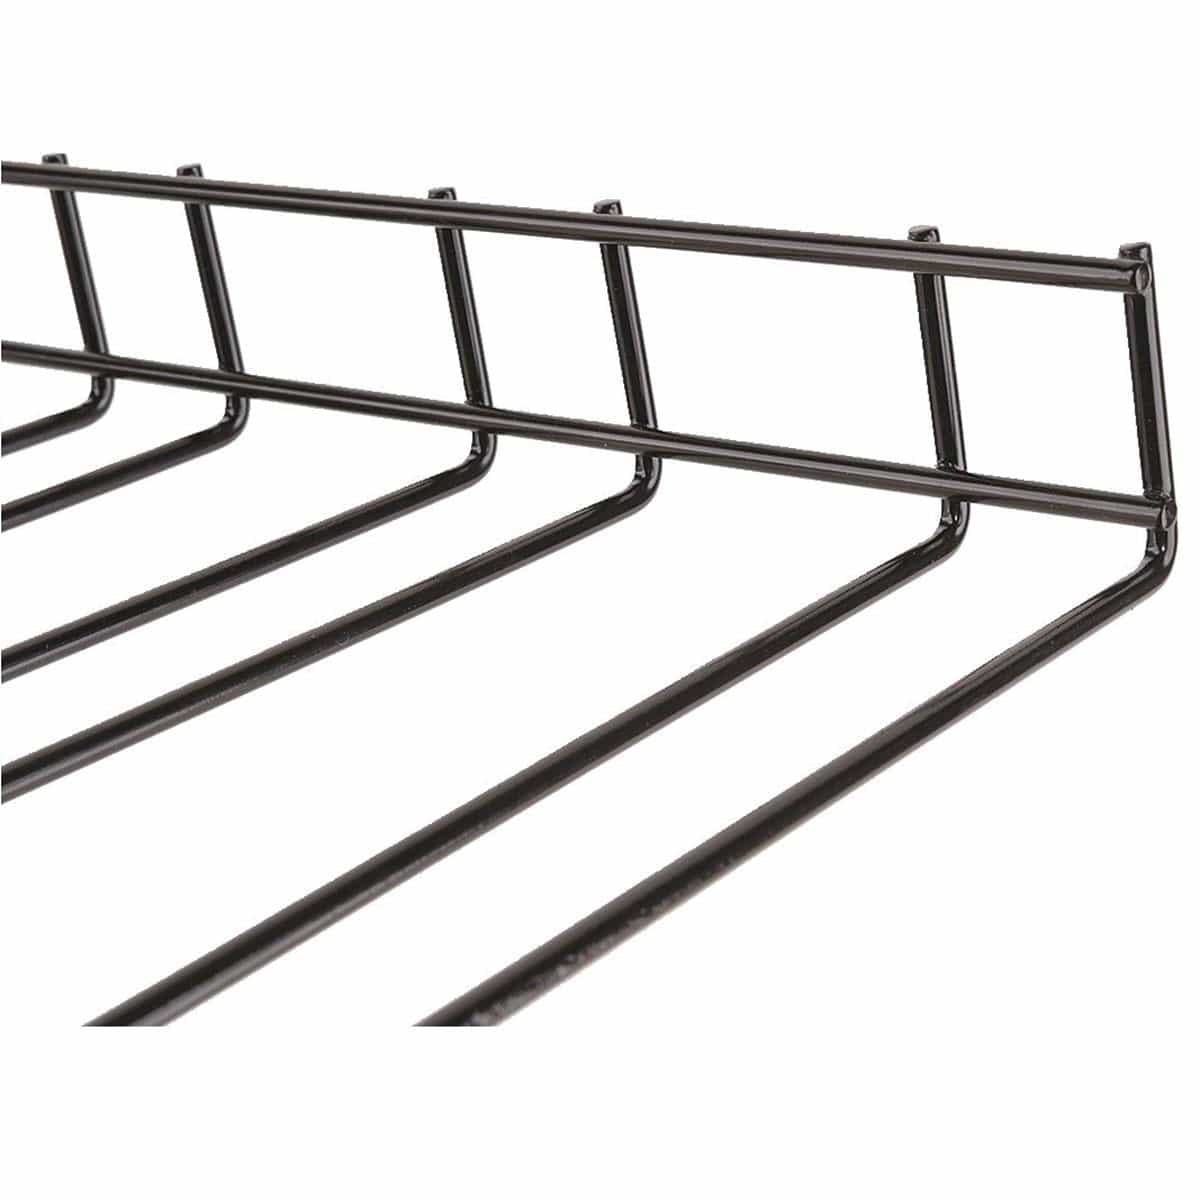 Gemplers Chore Boot Rack